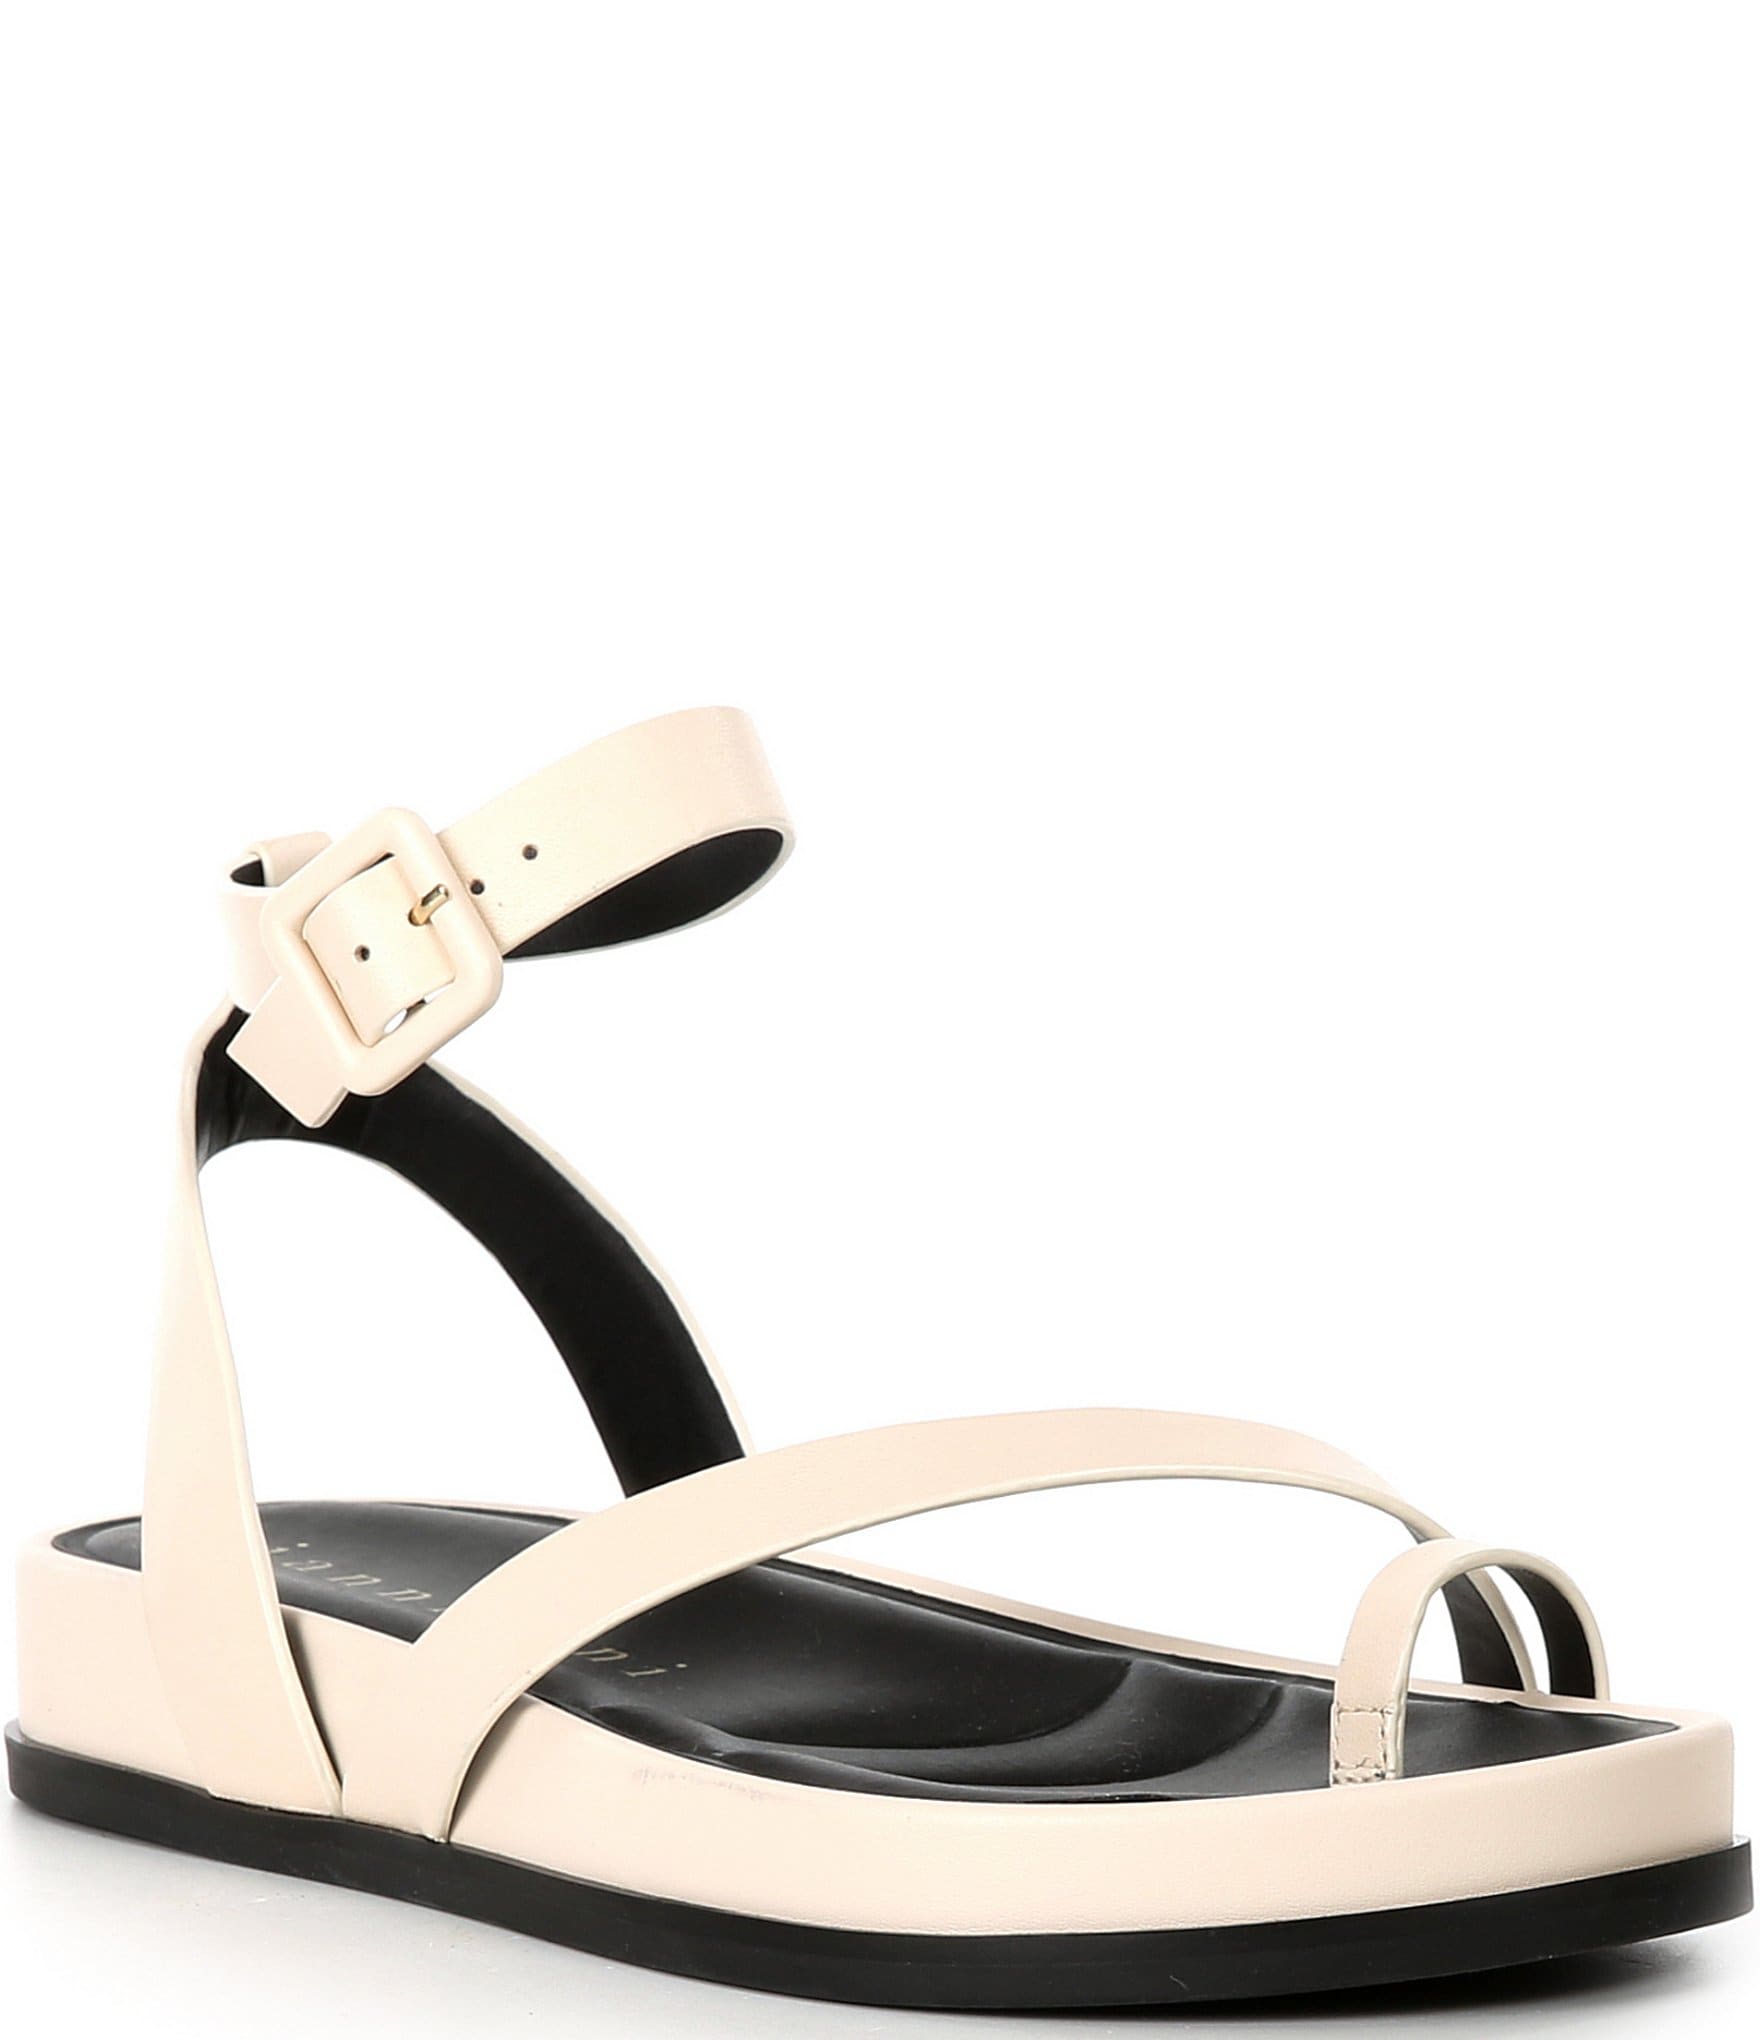 Vince Camuto Fancey Leather Knotted Woven Platform Sandals